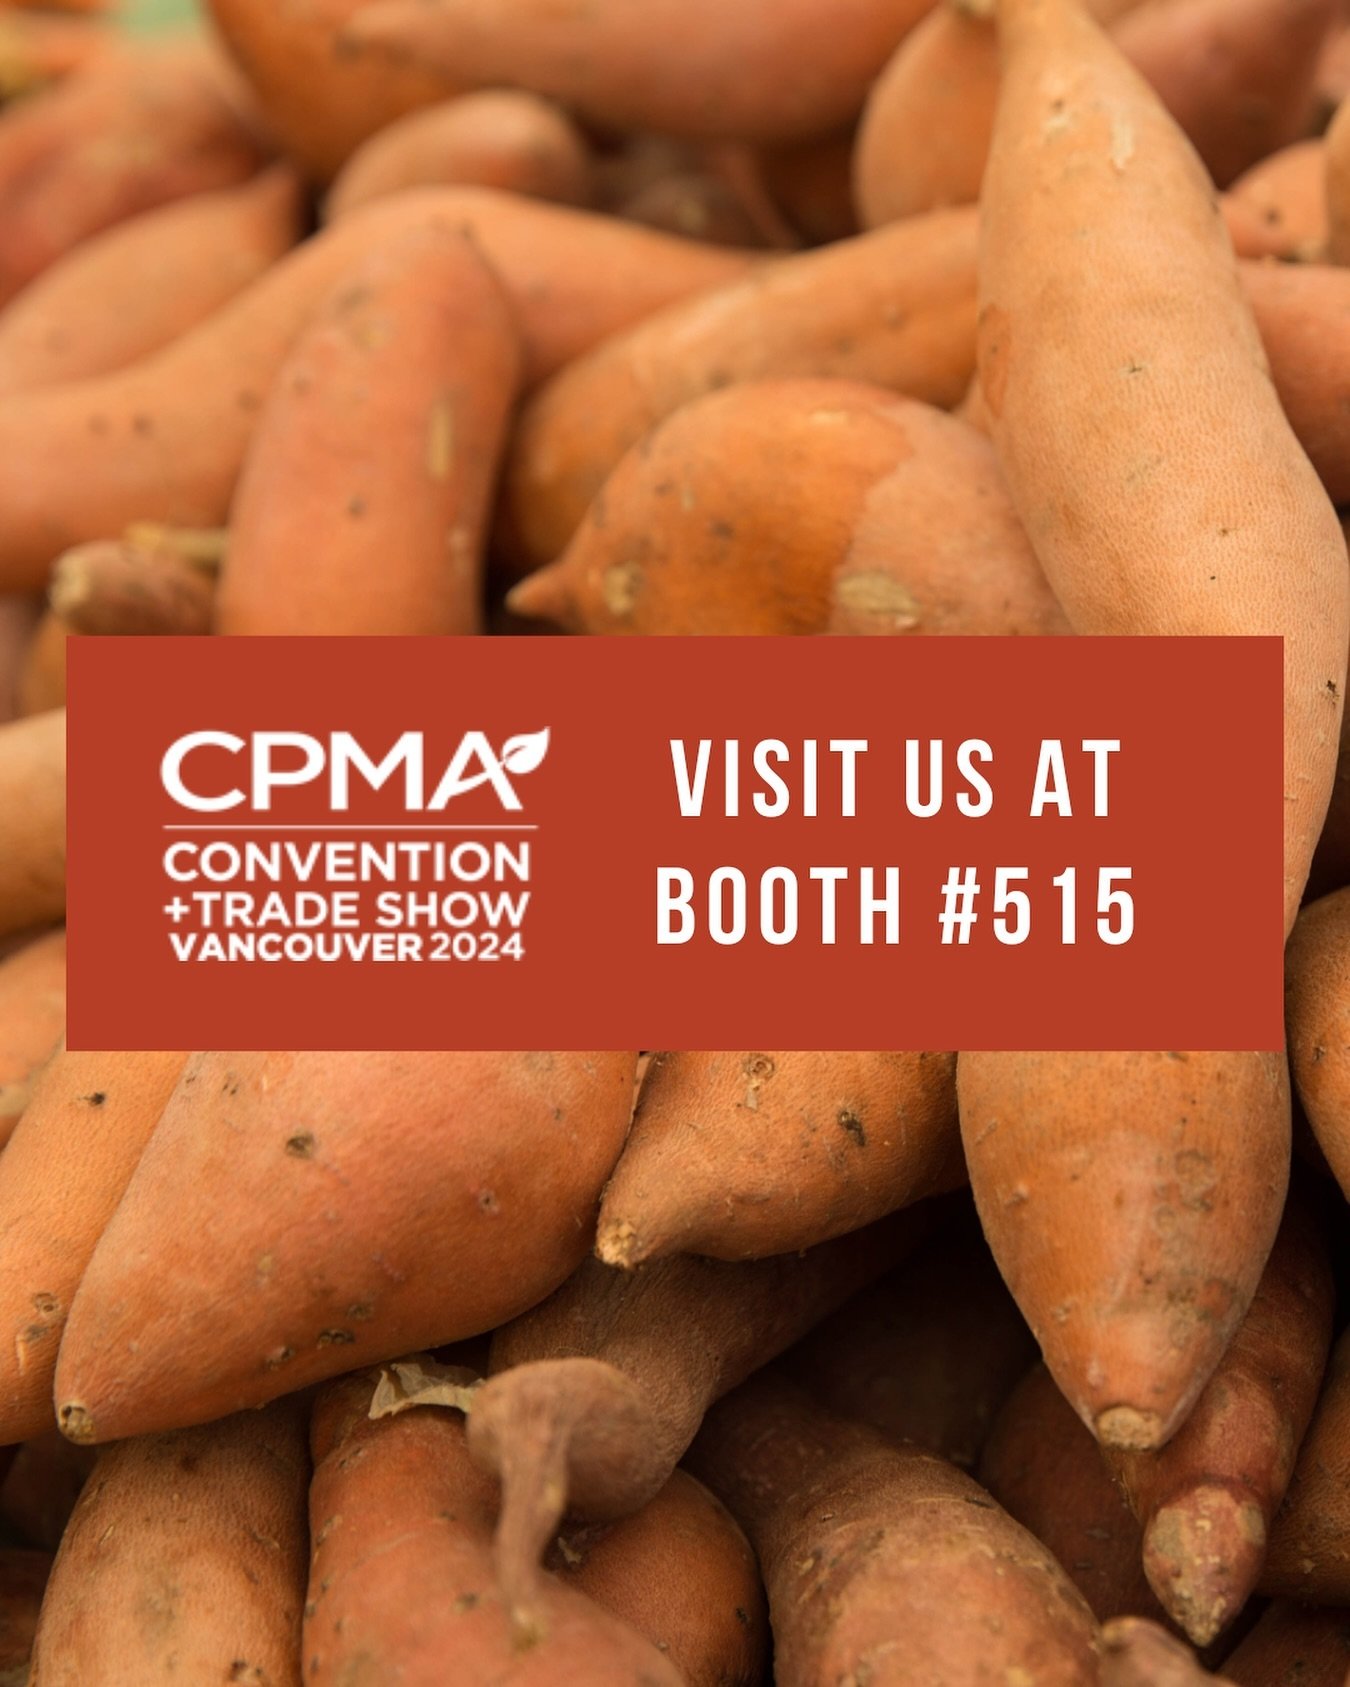 We&rsquo;re excited to attend CPMA&rsquo;s trade show in Vancouver next week. If you&rsquo;ll be there, come see us at booth 515!

#sweetpotatoes #ncsweetpotatoes #sweetpotatofarm #growerpackerexporter #gottobenc #familyfarm #sustainablefarming #orga